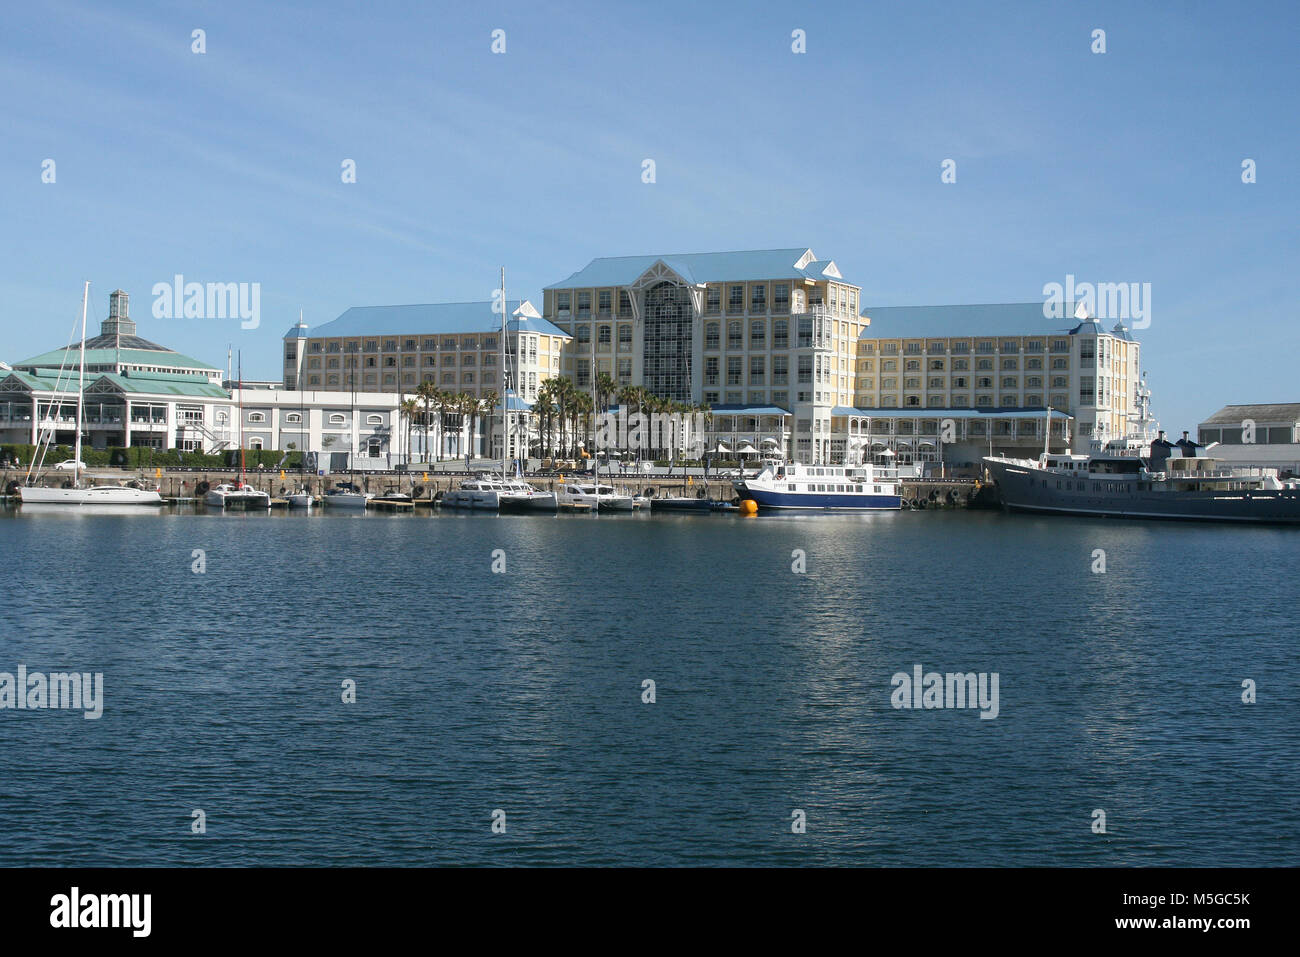 The Table Bay Hotel, Victoria Wharf Shopping Centre, V & A Waterfront, Cape Town, South Africa Stock Photo